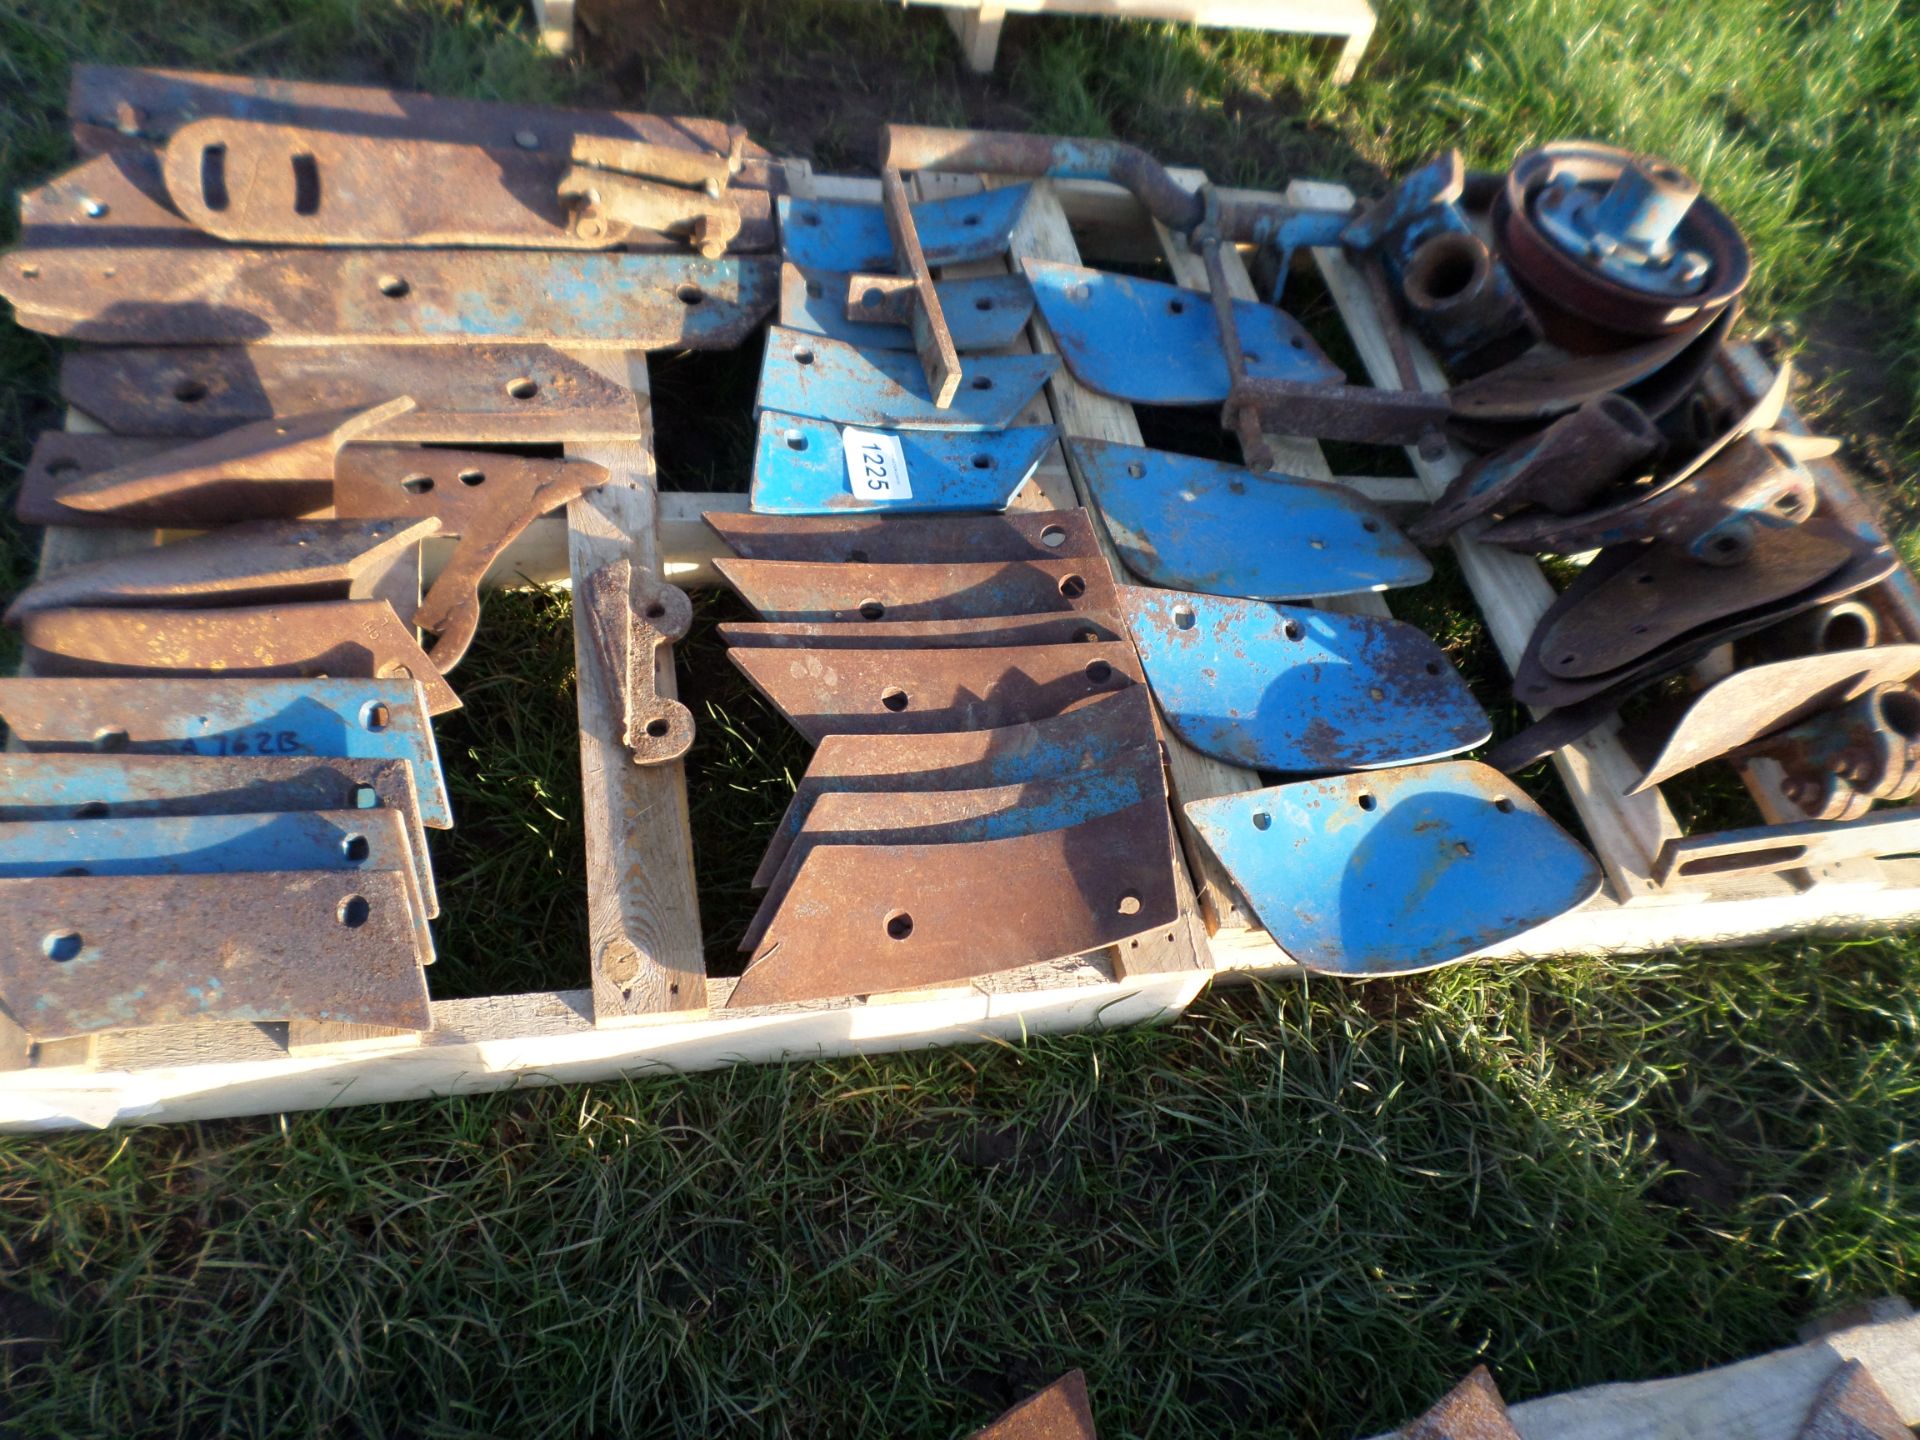 Ransome plough parts - Image 2 of 2